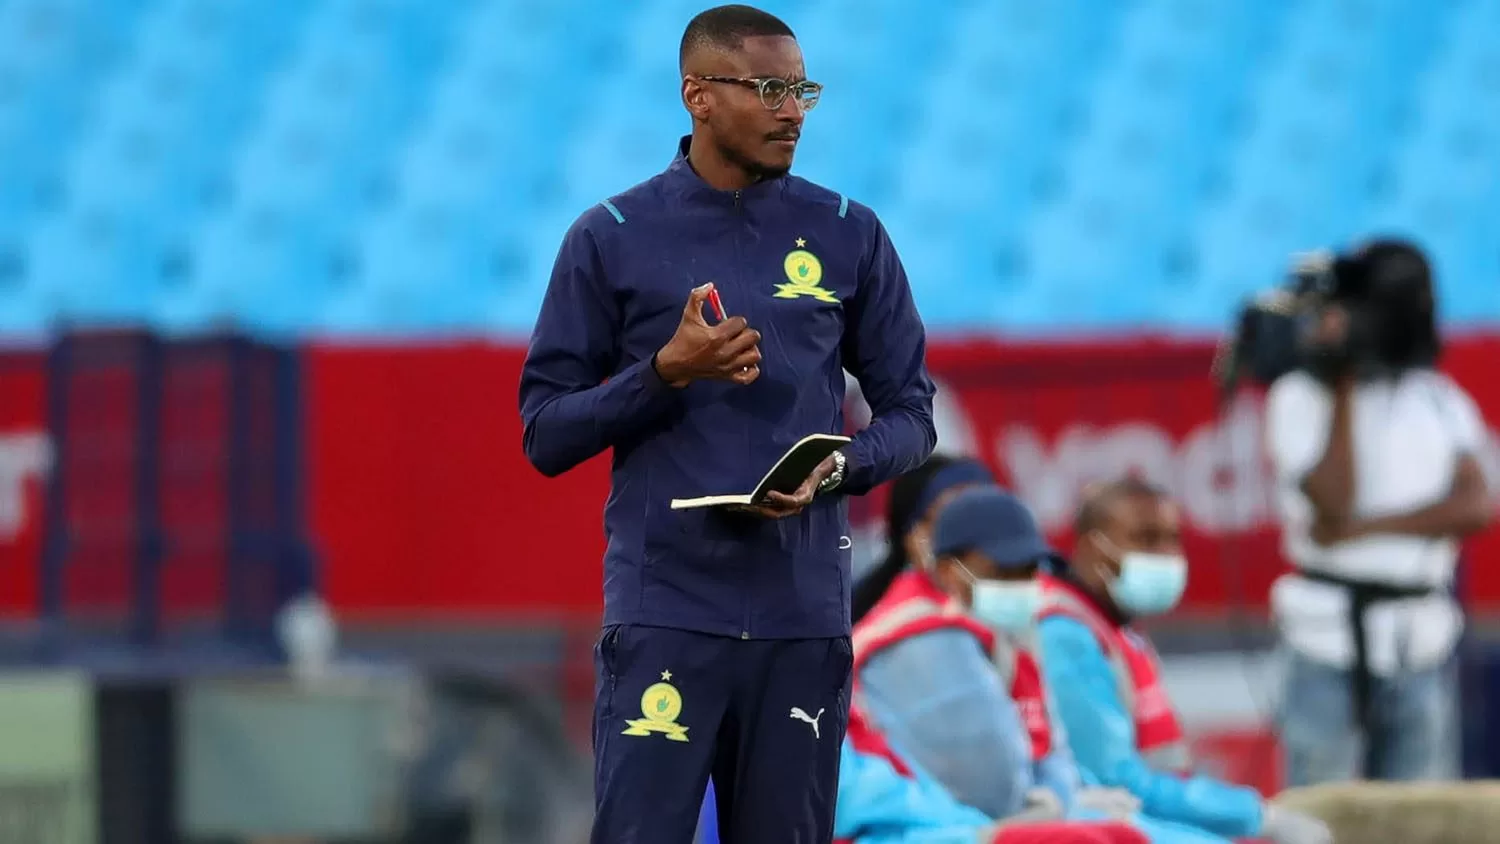 Rulani Mokwena was left disappointed after Mamelodi Sundowns were held by Polokwane City